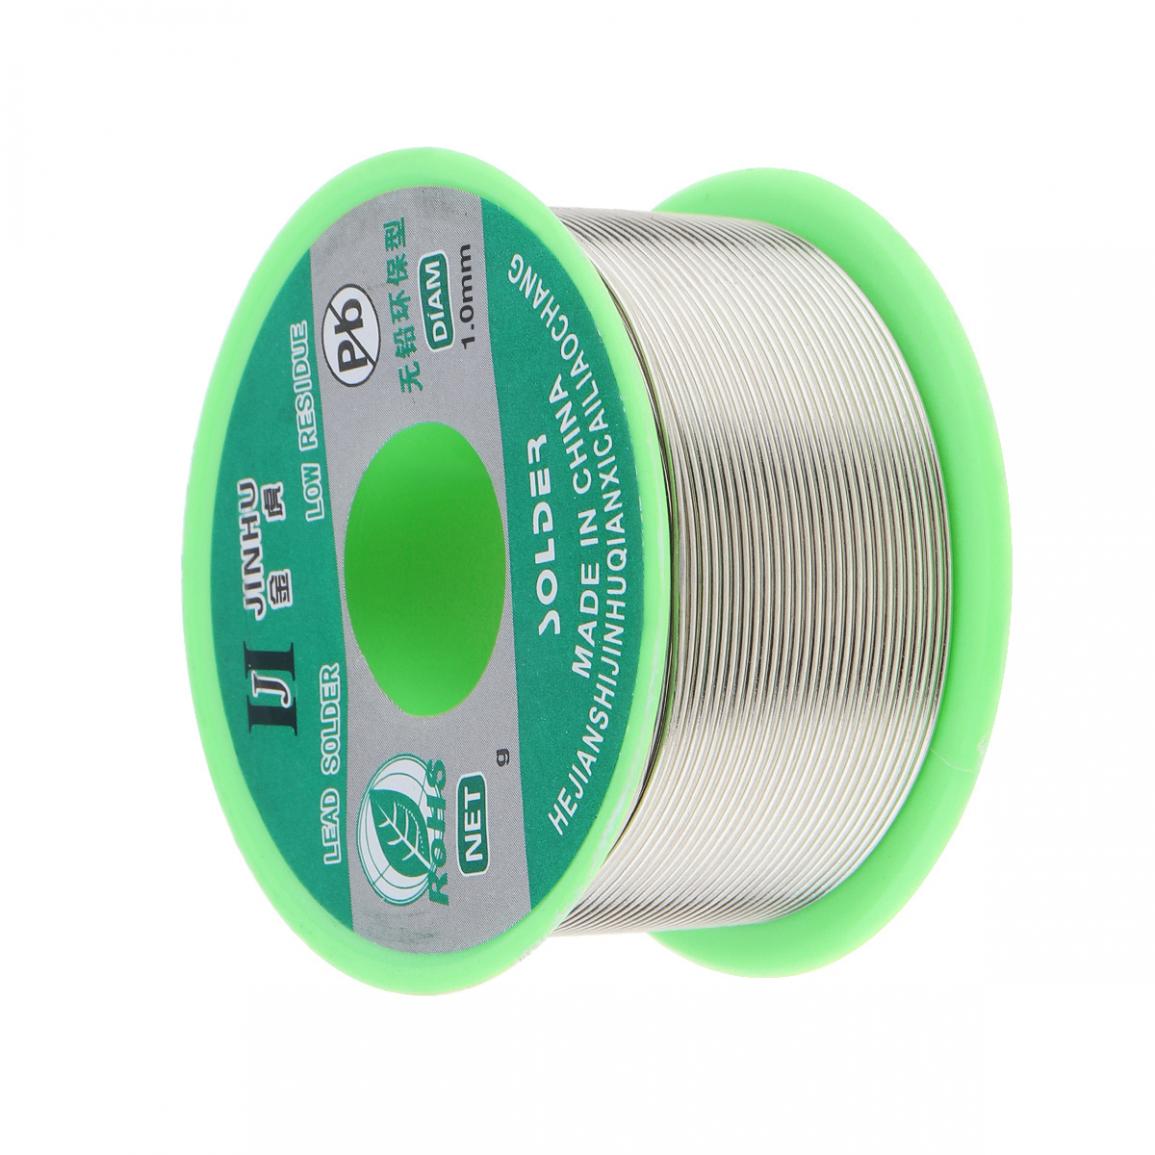 100g 99.7% Sn 0.03% Cu Lead-free Rosin Core Solder Tin Copper Welding Wire for Electric Soldering Iron 0.5mm 0.6mm 0.8mm 1.0mm